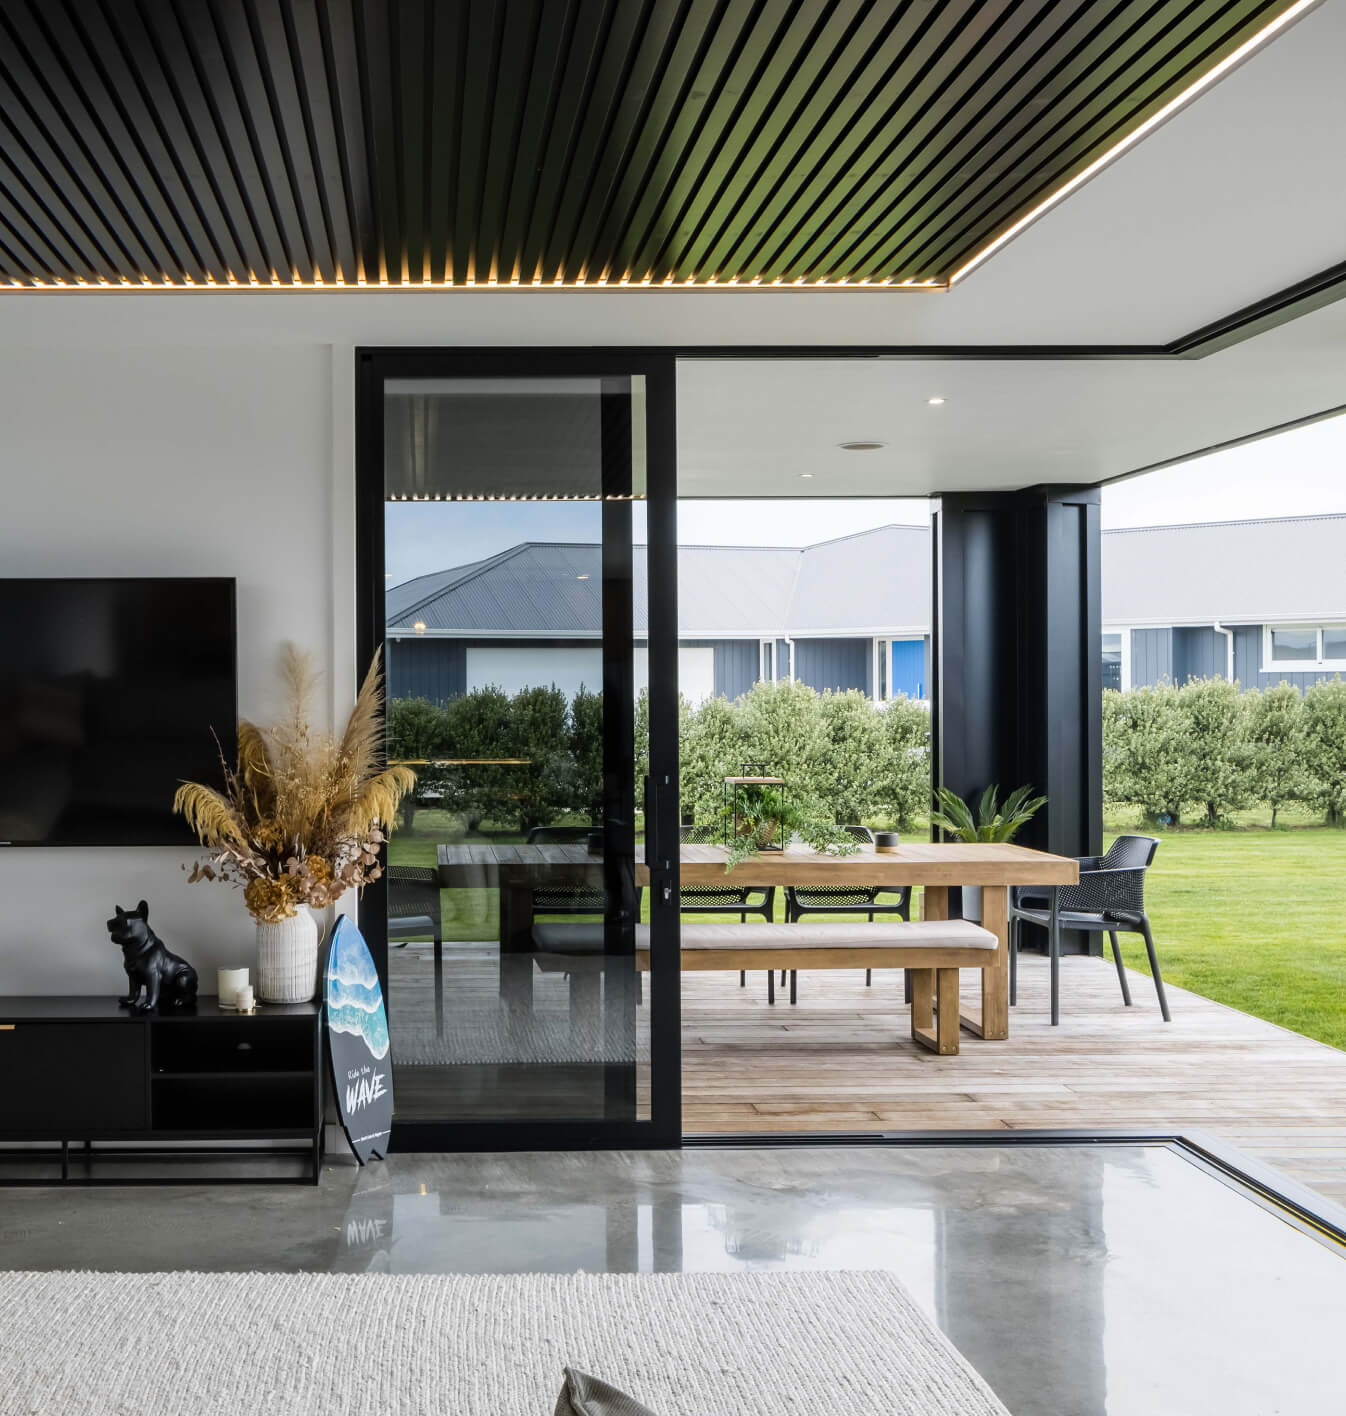 Duco Ceiling to floor sliding doors and opening onto a deck in a house setting